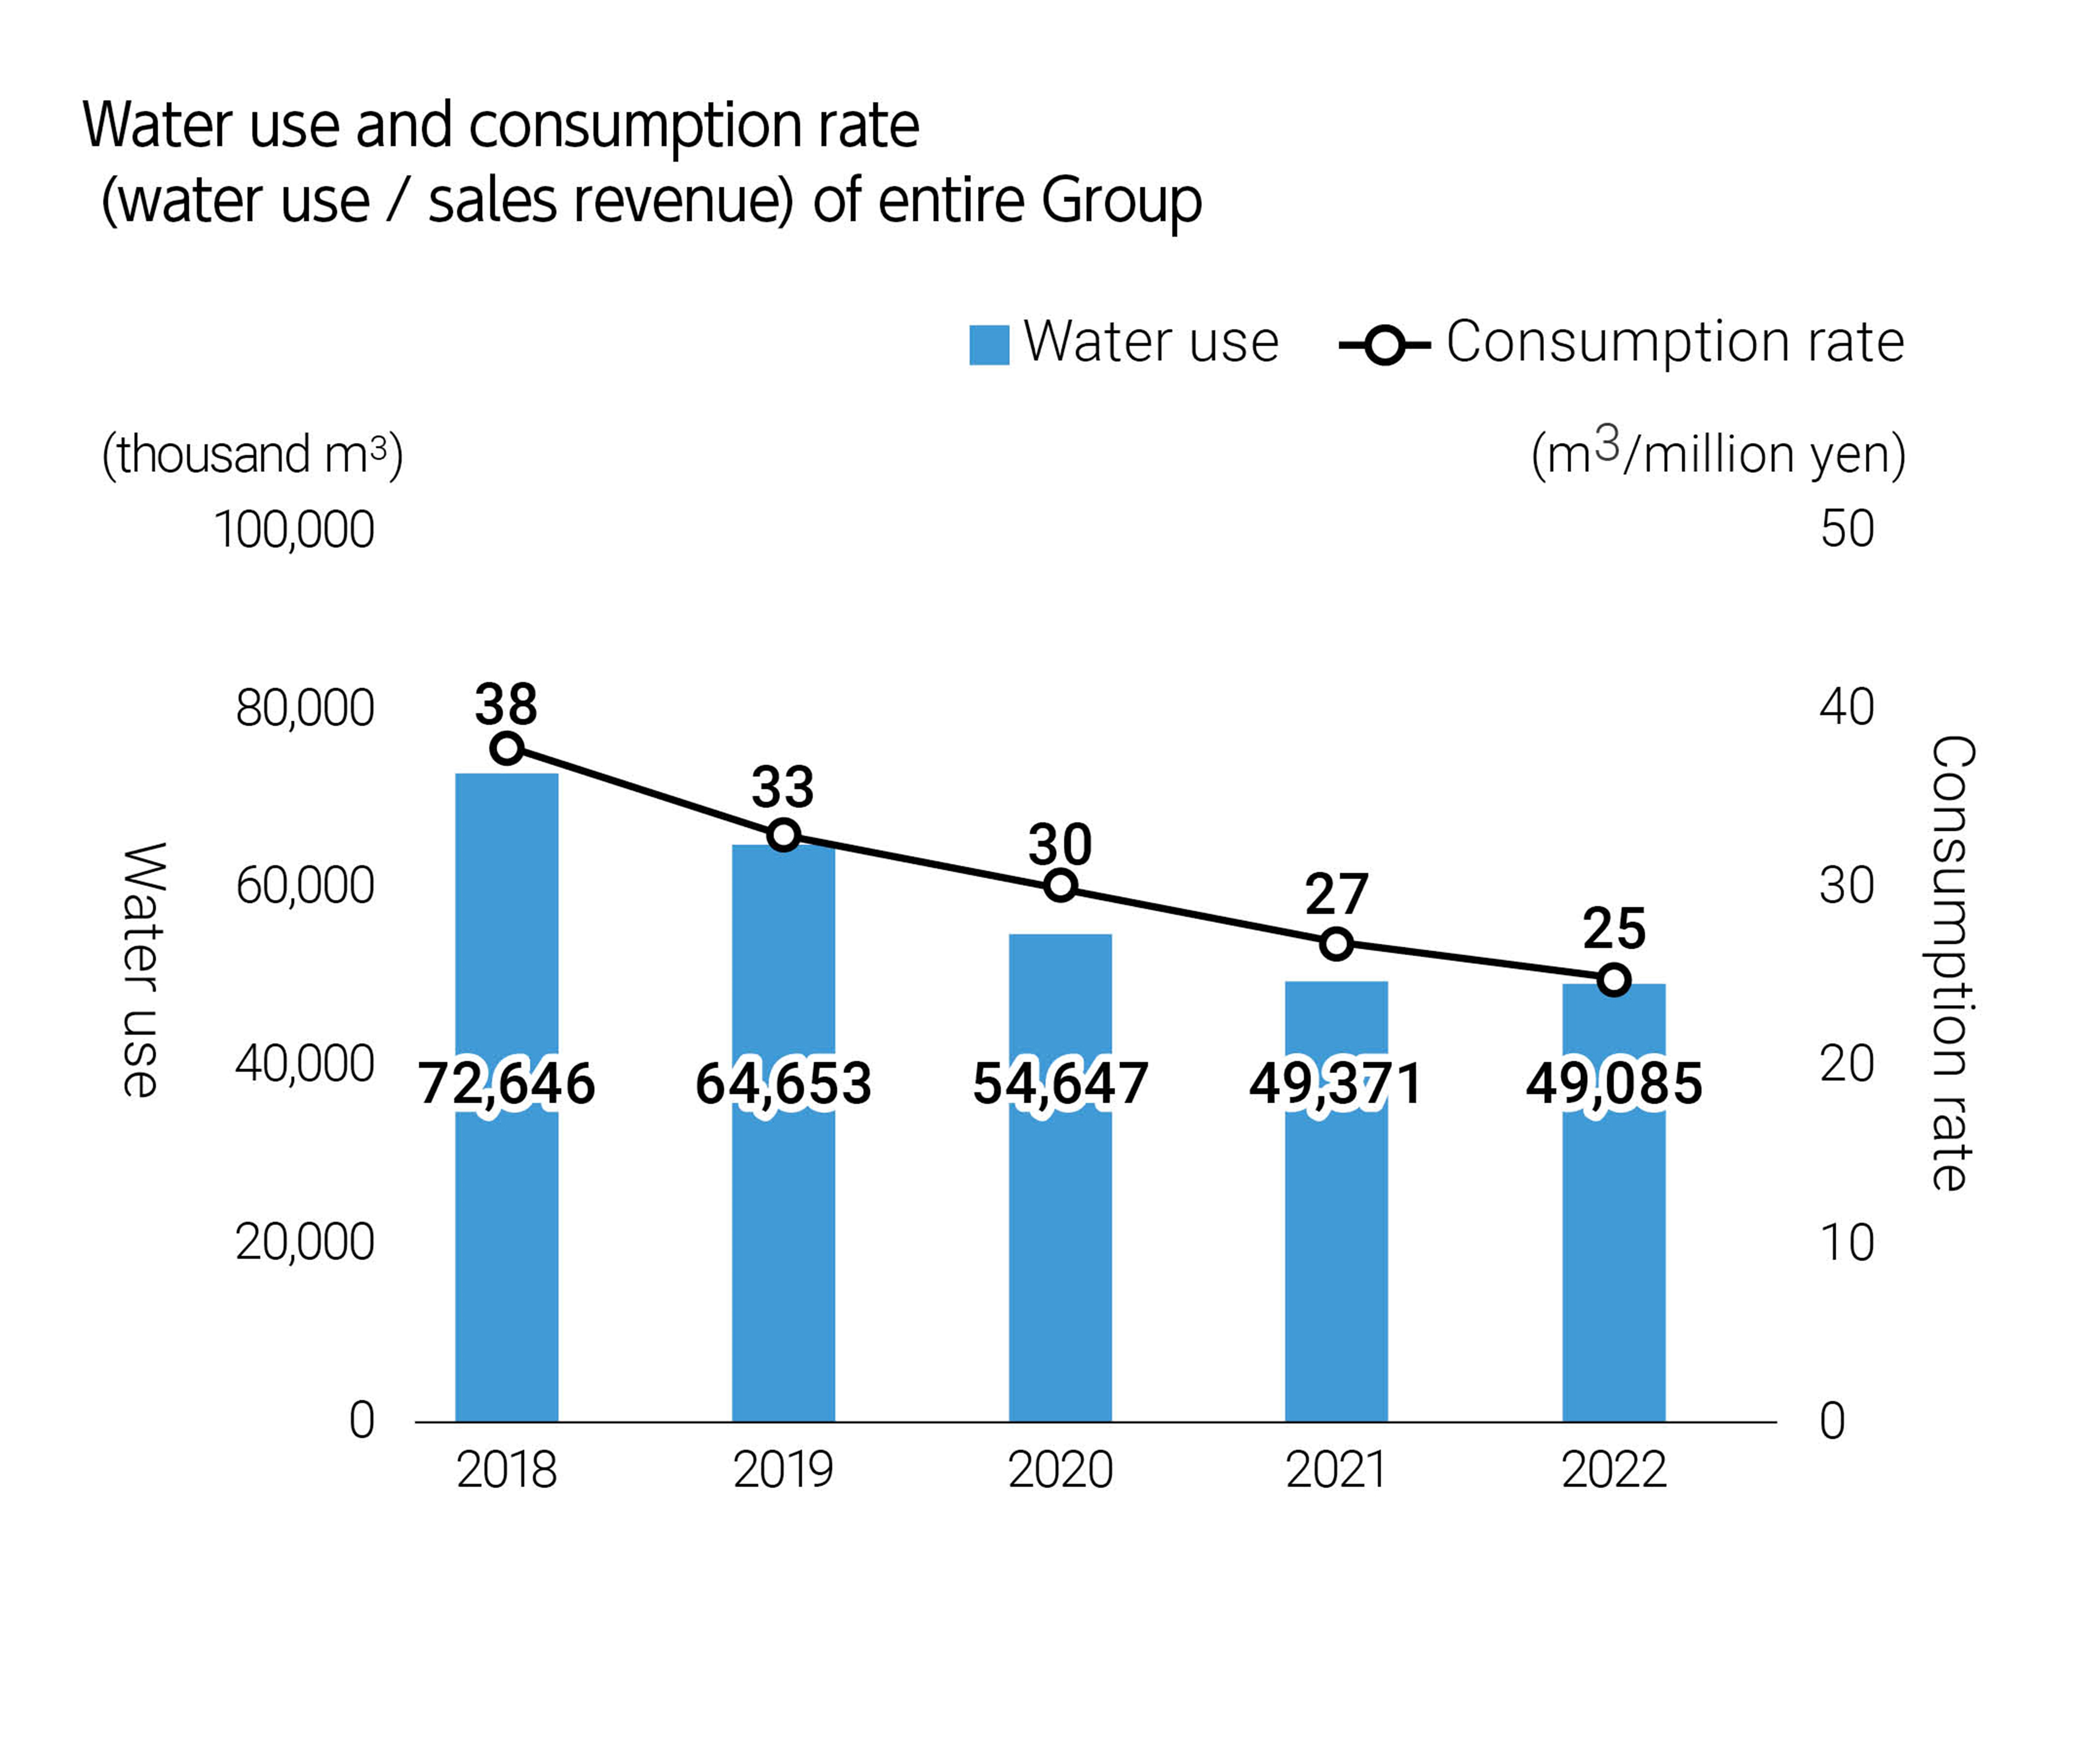 Figure: Water use and consumption rate (water use / sales revenue) of entire Group, Water use and consumption rate (water use / production volume) of Kirin Brewery, Water use and consumption rate (water use / production volume) of Lion(Oceania region*), Kyowa Kirin (GIobaI) water use and basic unit (water use / sales revenue), Kyowa Hakko Bio(GIobaI) water use and basic unit (water use / sales revenue), Cyclical water use and cyclical use ratiO (cyclical use / (tap water use 十 cyclical use)) of entire Group